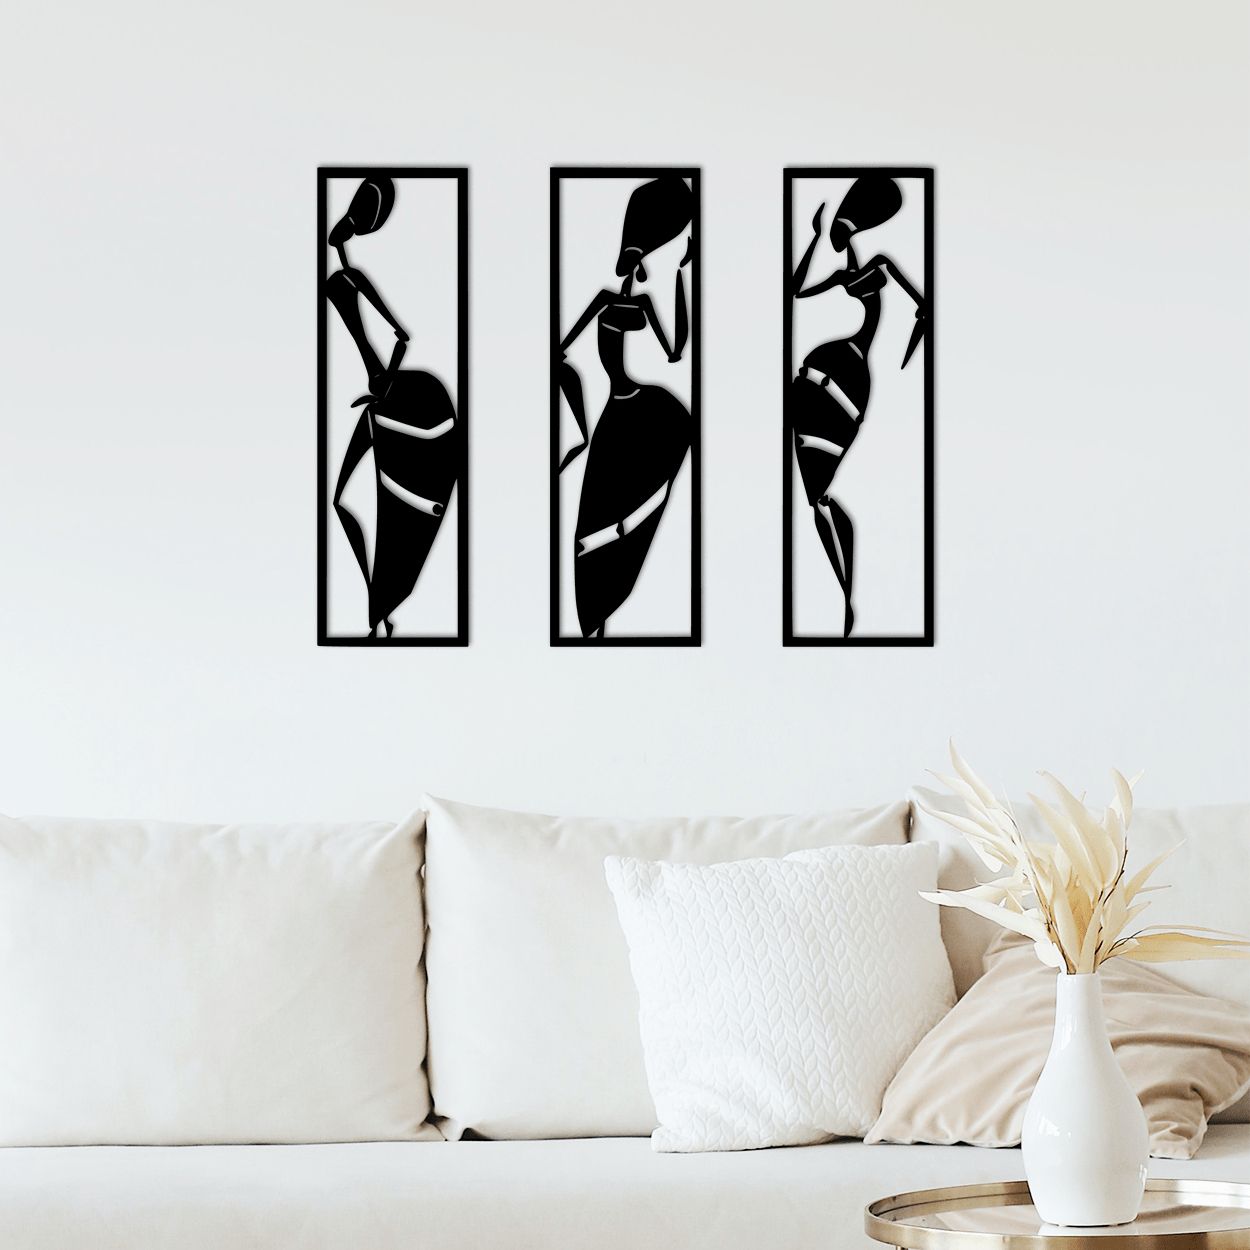 Elegant Wall Art, Modern Wall Art For Homestagum Throughout Latest 3 Layers Wall Sculptures (View 15 of 20)